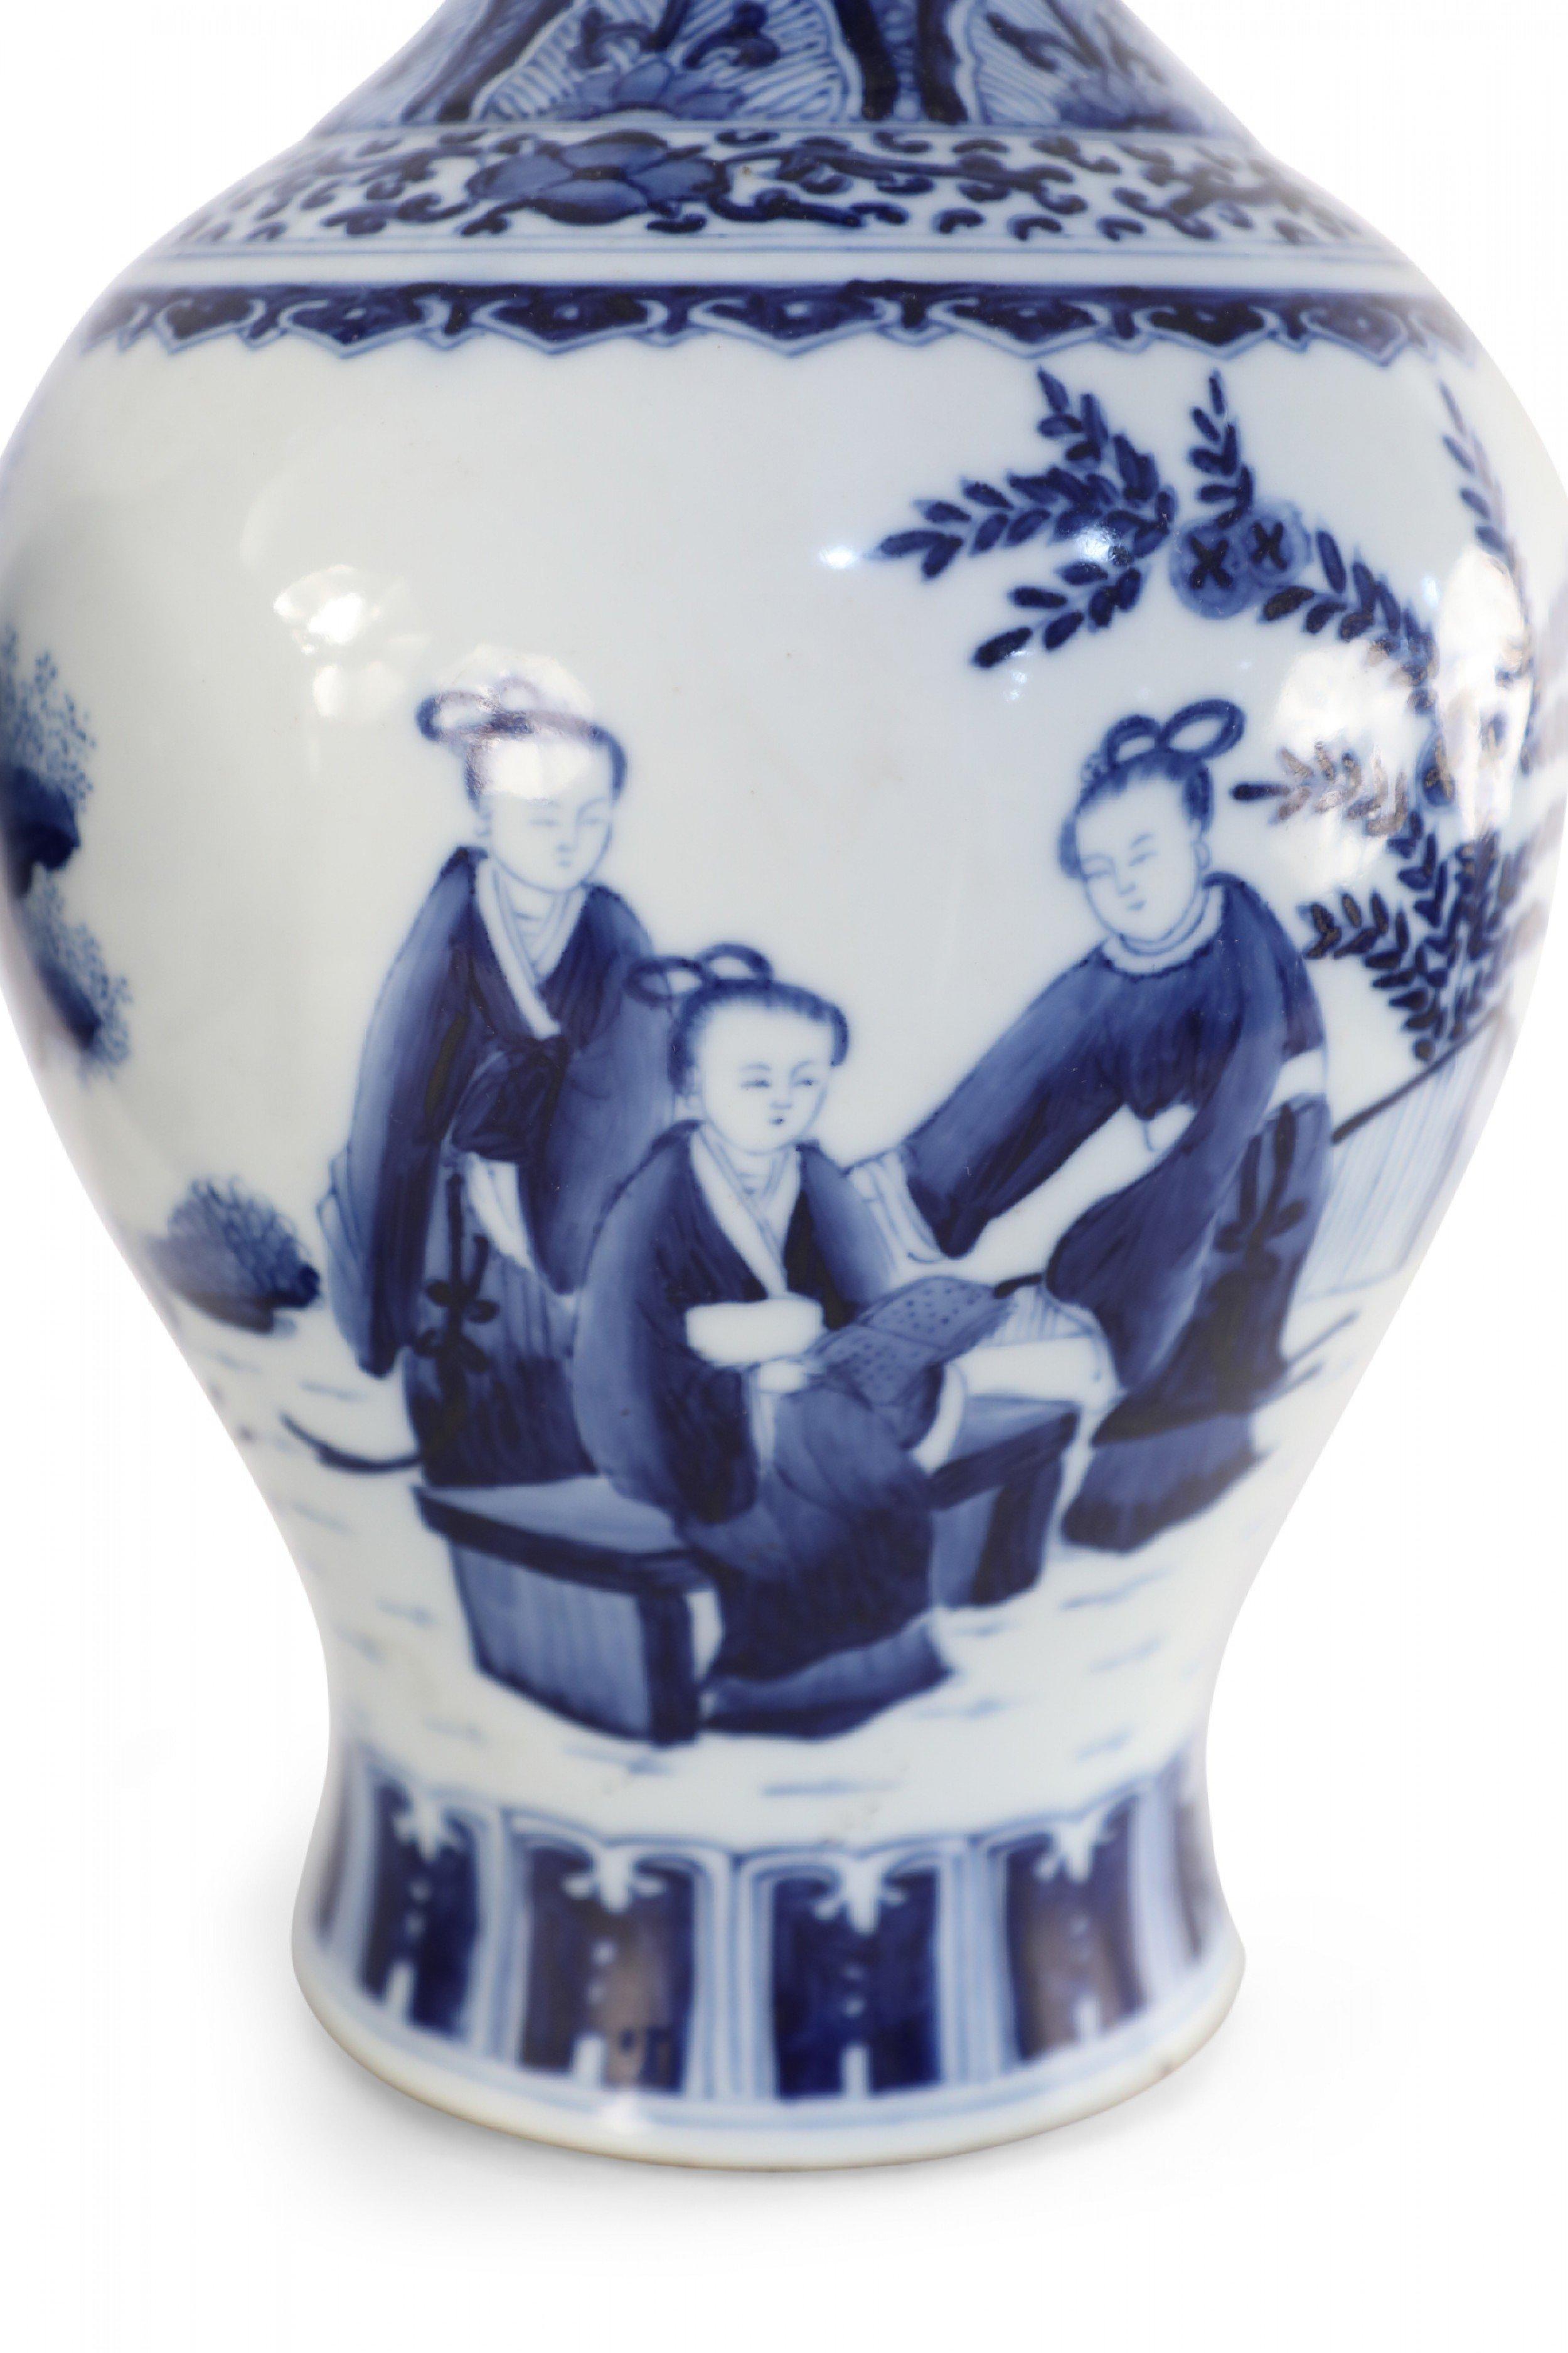 Chinese Export Pair of Chinese Qing Dynasty White and Blue Figurative Scene Porcelain Vases